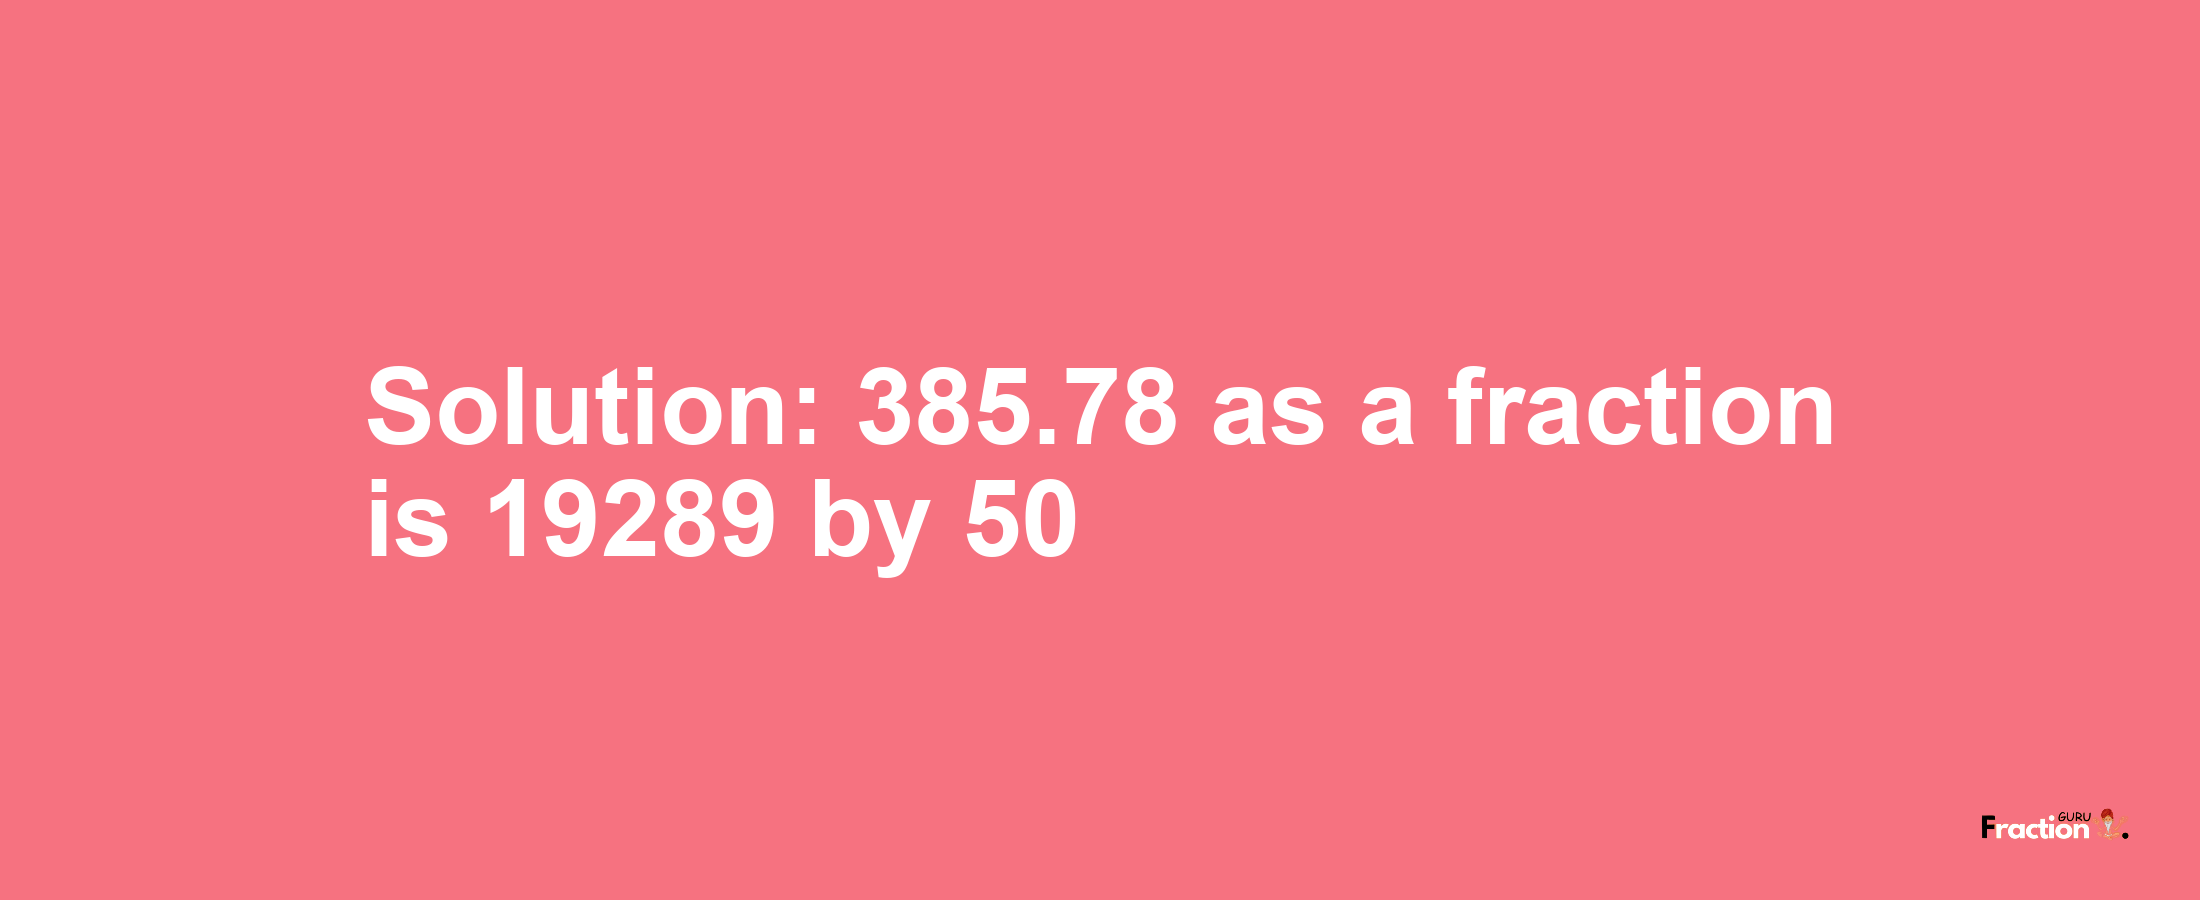 Solution:385.78 as a fraction is 19289/50